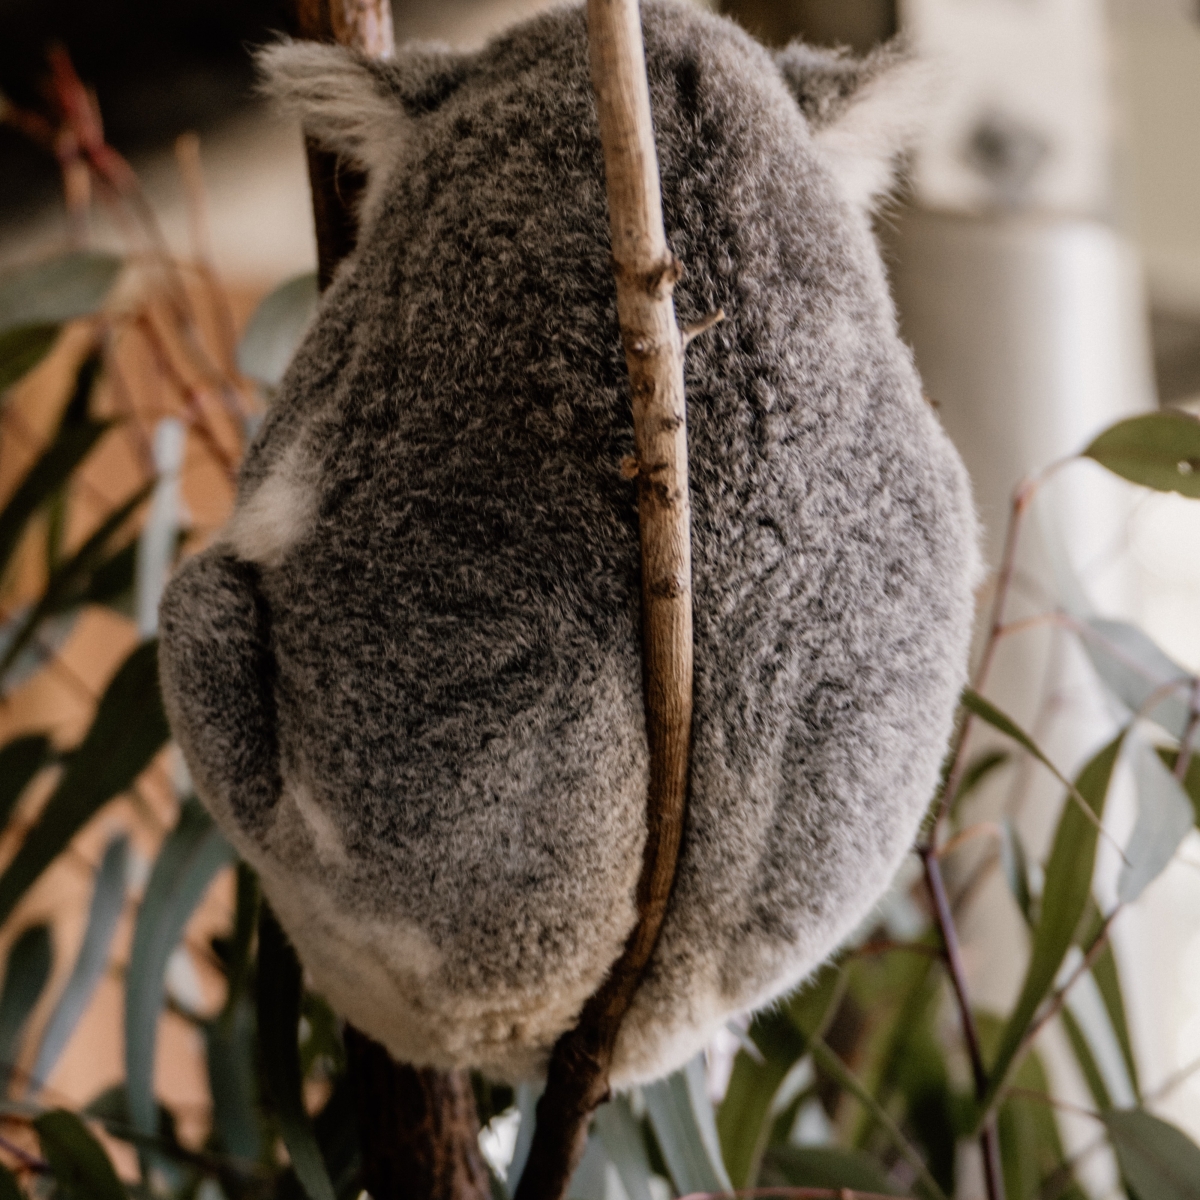 Koala positions his bum on a branch of a tree